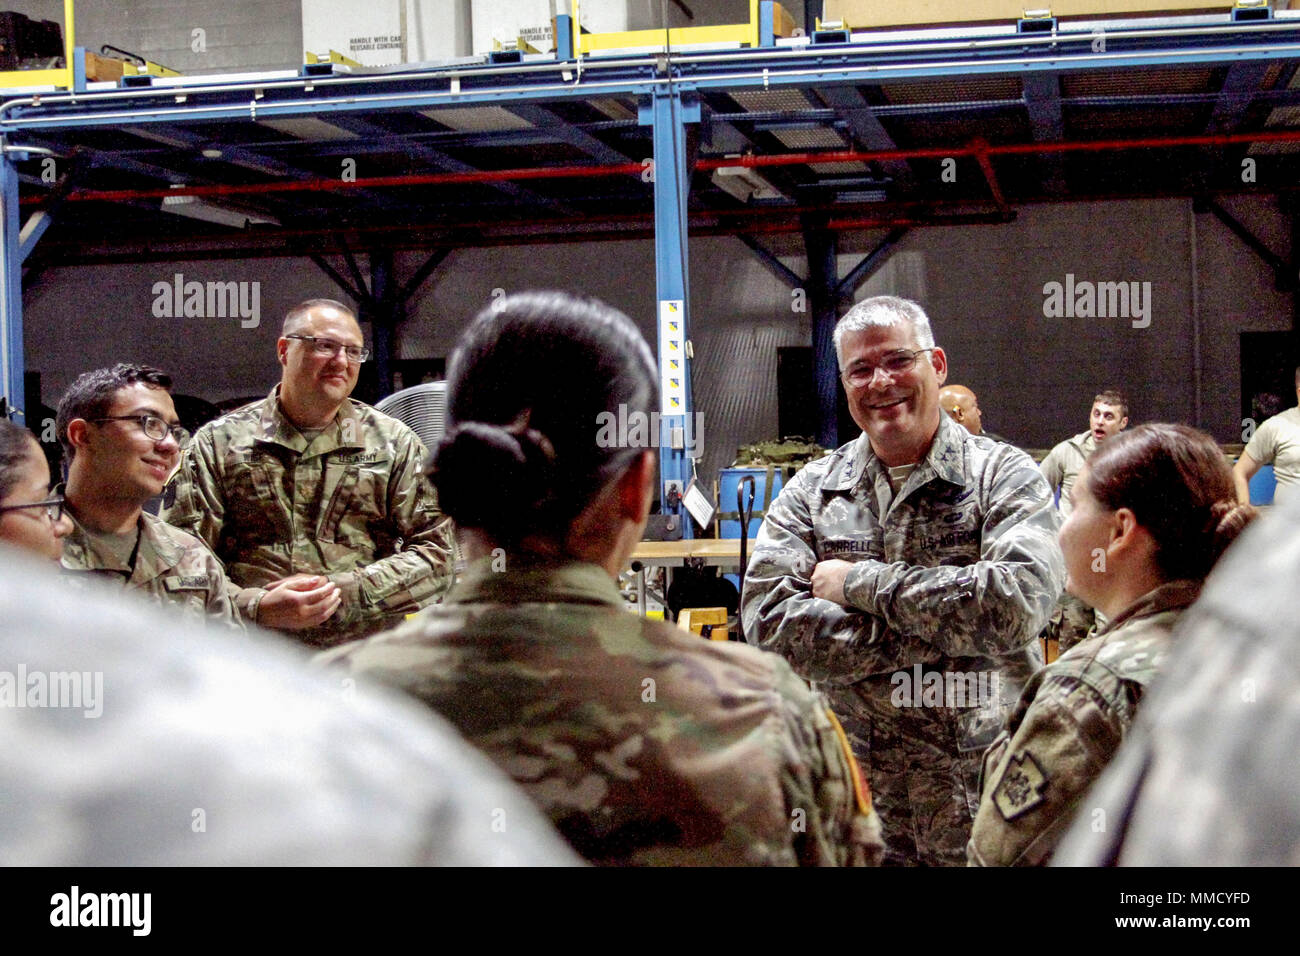 Maj. Gen. Tony Carrelli, Pennsylvania’s adjutant general, speaks with Soldiers from the 108th Area Support Medical Company, 213th Regional Support Group, Pennsylvania Army National Guard and Soldiers from the PAARNG Medical Detachment before their departure for the U.S. Virgin Islands October 12, 2017 in Harrisburg, Pennsylvania. The Soldiers will be providing continuous medical care to the citizens of the U.S. Virgin Islands as well as providing ongoing medical care to U.S. troops currently operating on the U.S. Virgin Islands. (U.S. Army National Guard photo by Spc. Anna Churco) Stock Photo